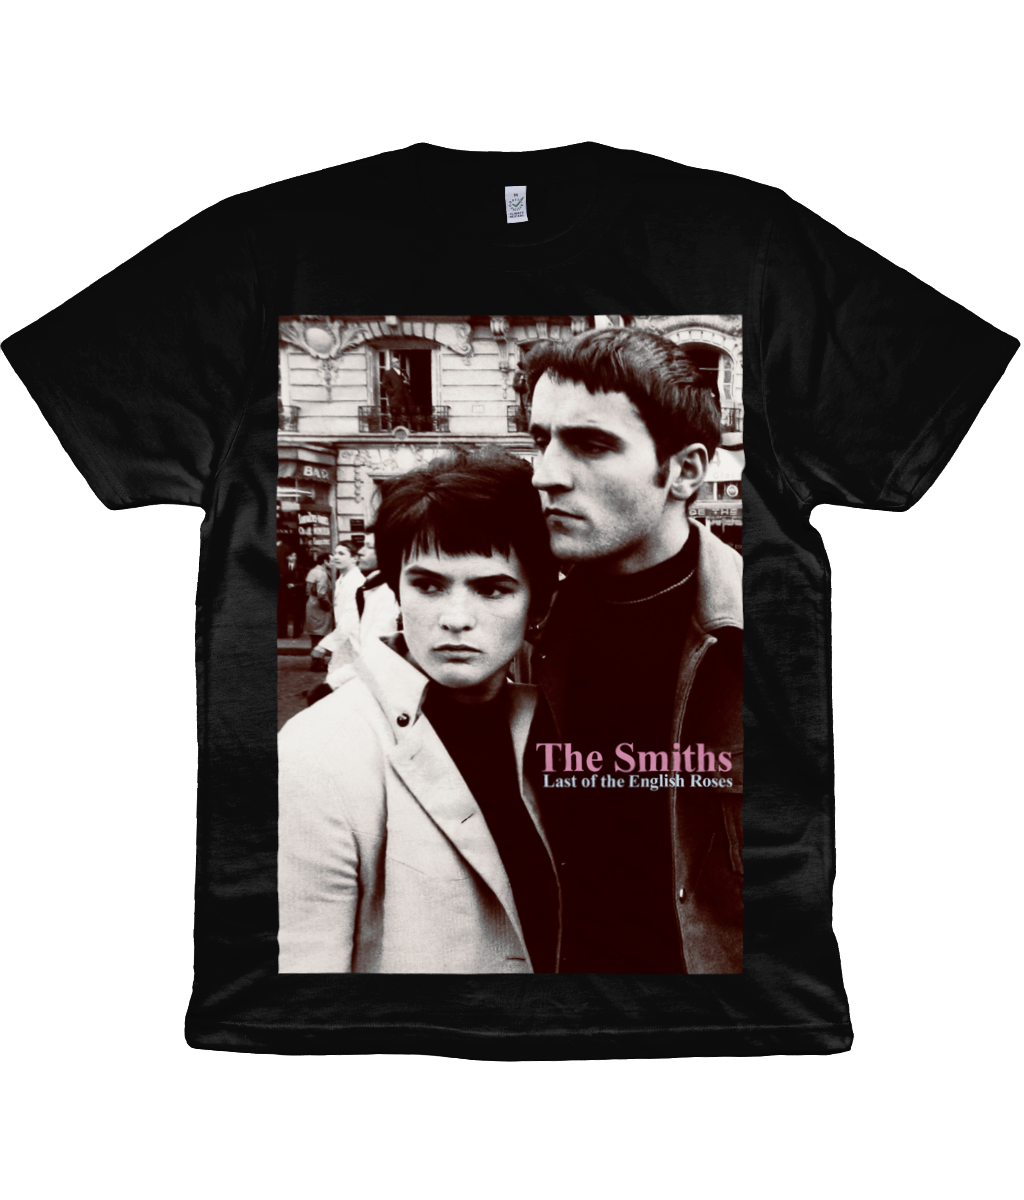 The Smiths - Last of the English Roses